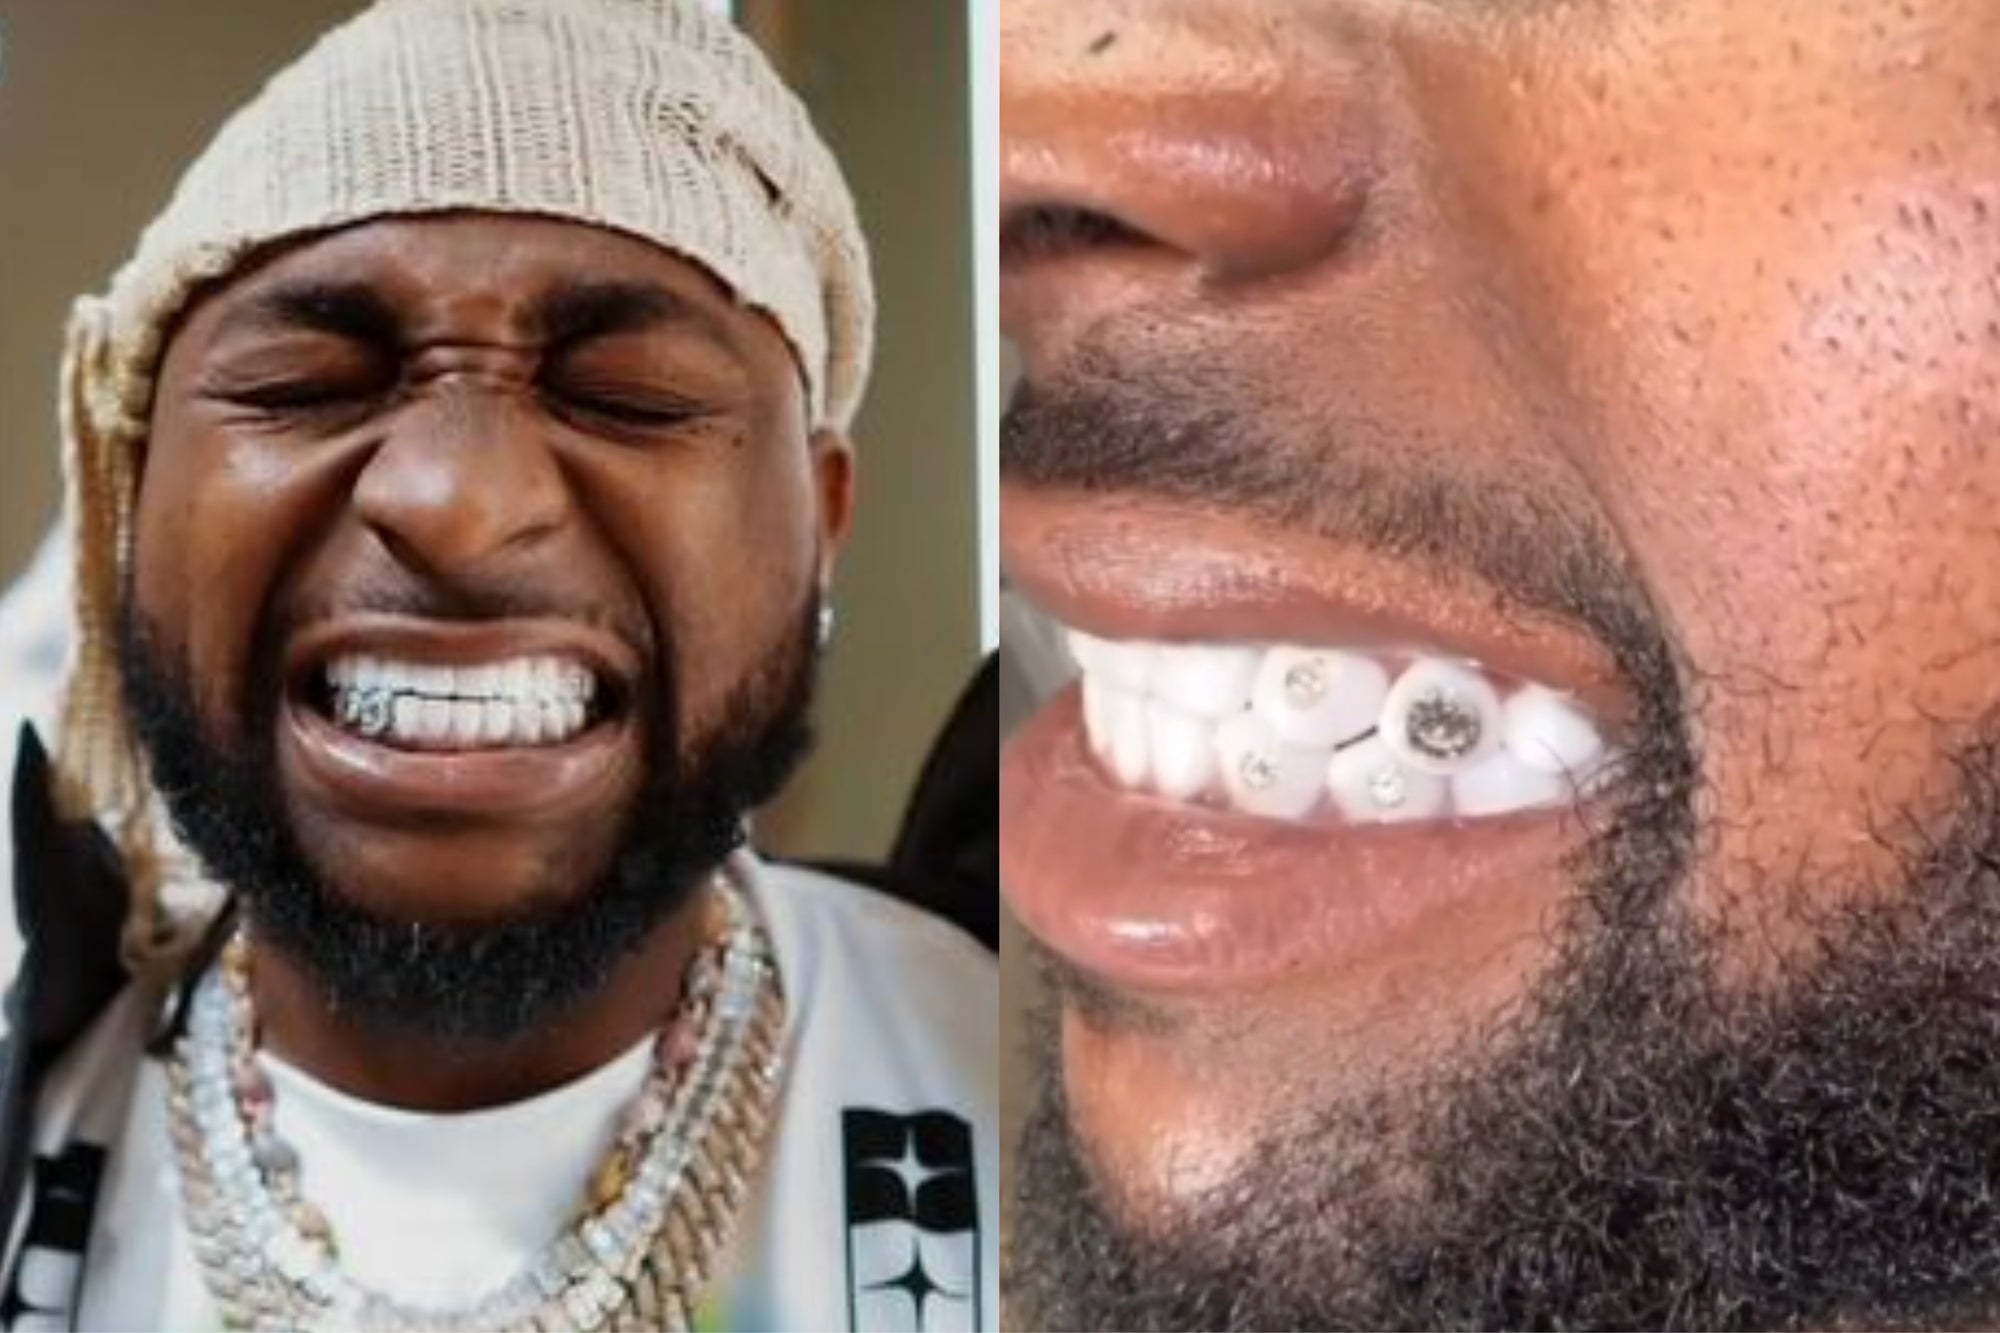 Davido Flaunts New Diamond-Encrusted Tooth in Viral Clip